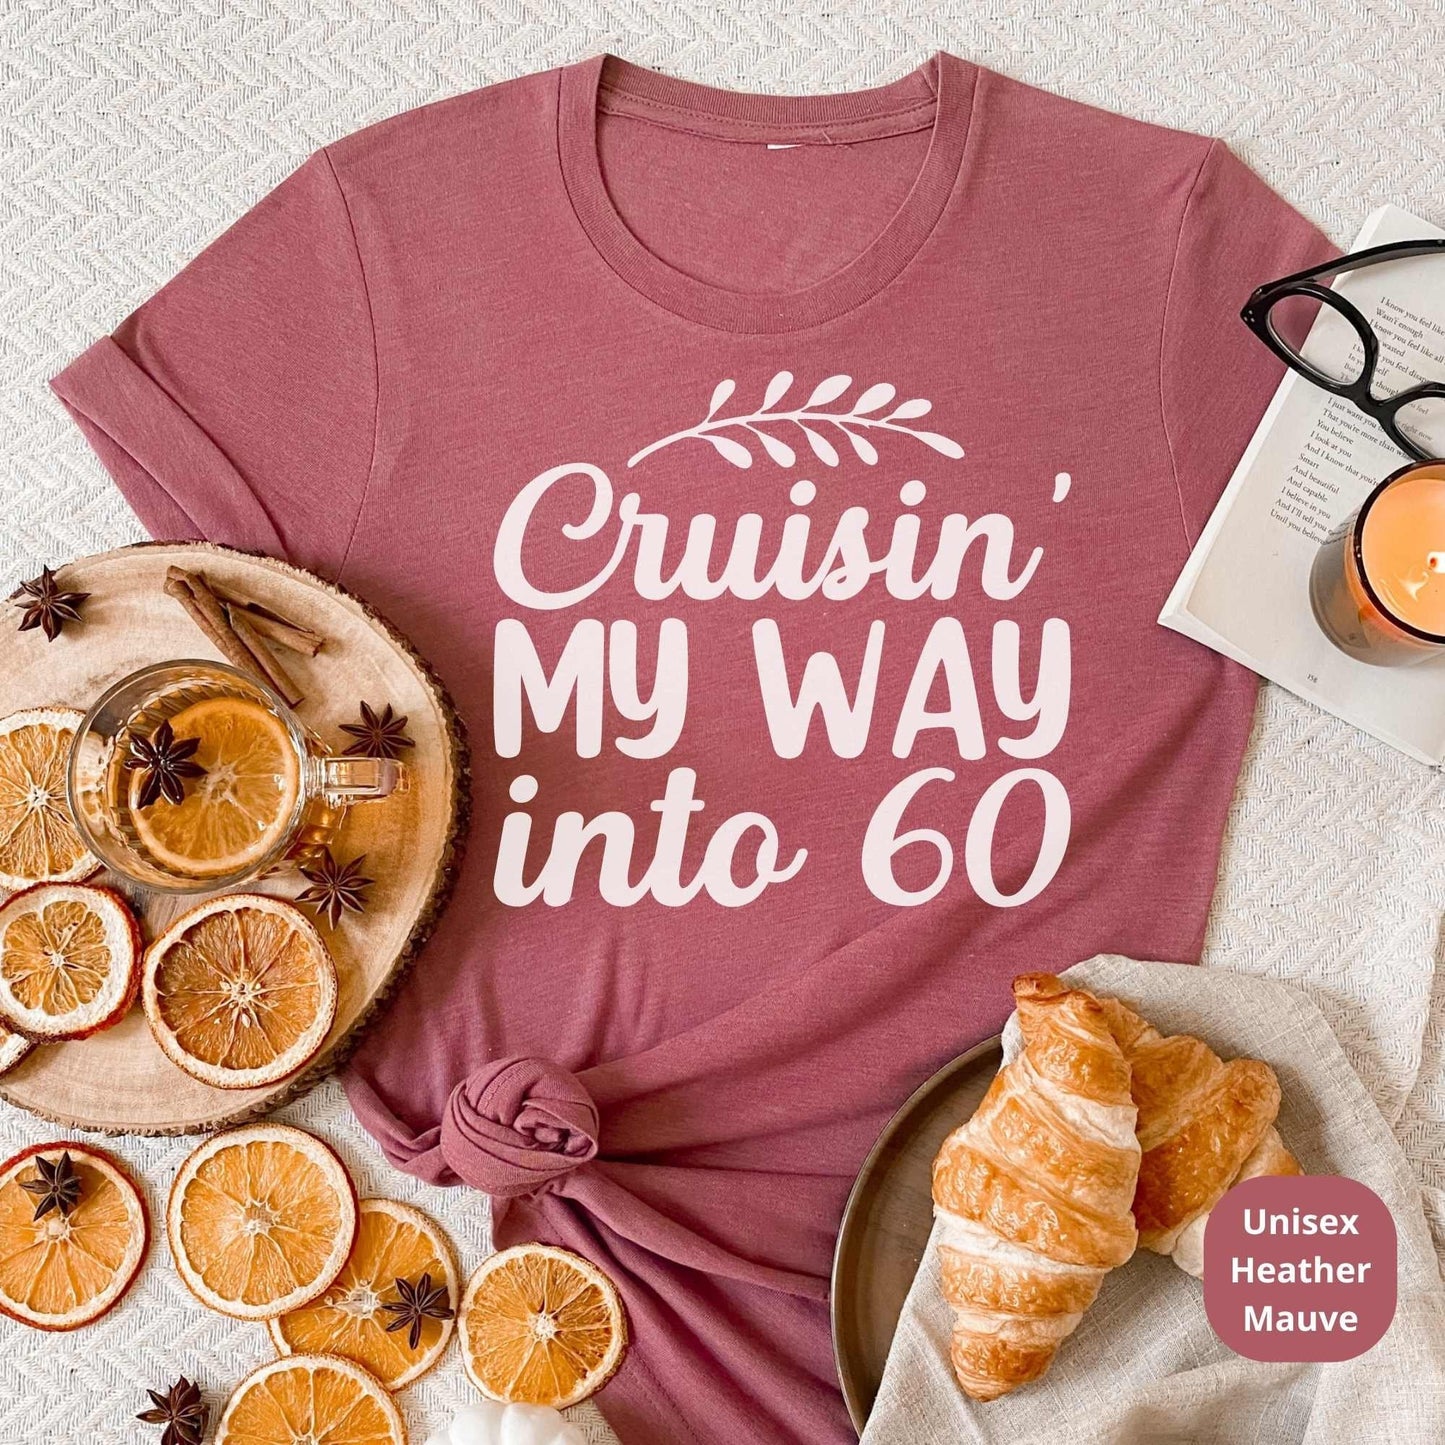 60th Birthday Cruise Shirt, 60th Birthday Gift, Great for Grands, Parents, Aunt, Cousins & Loved Ones Bday Party or Anniversary Celebration